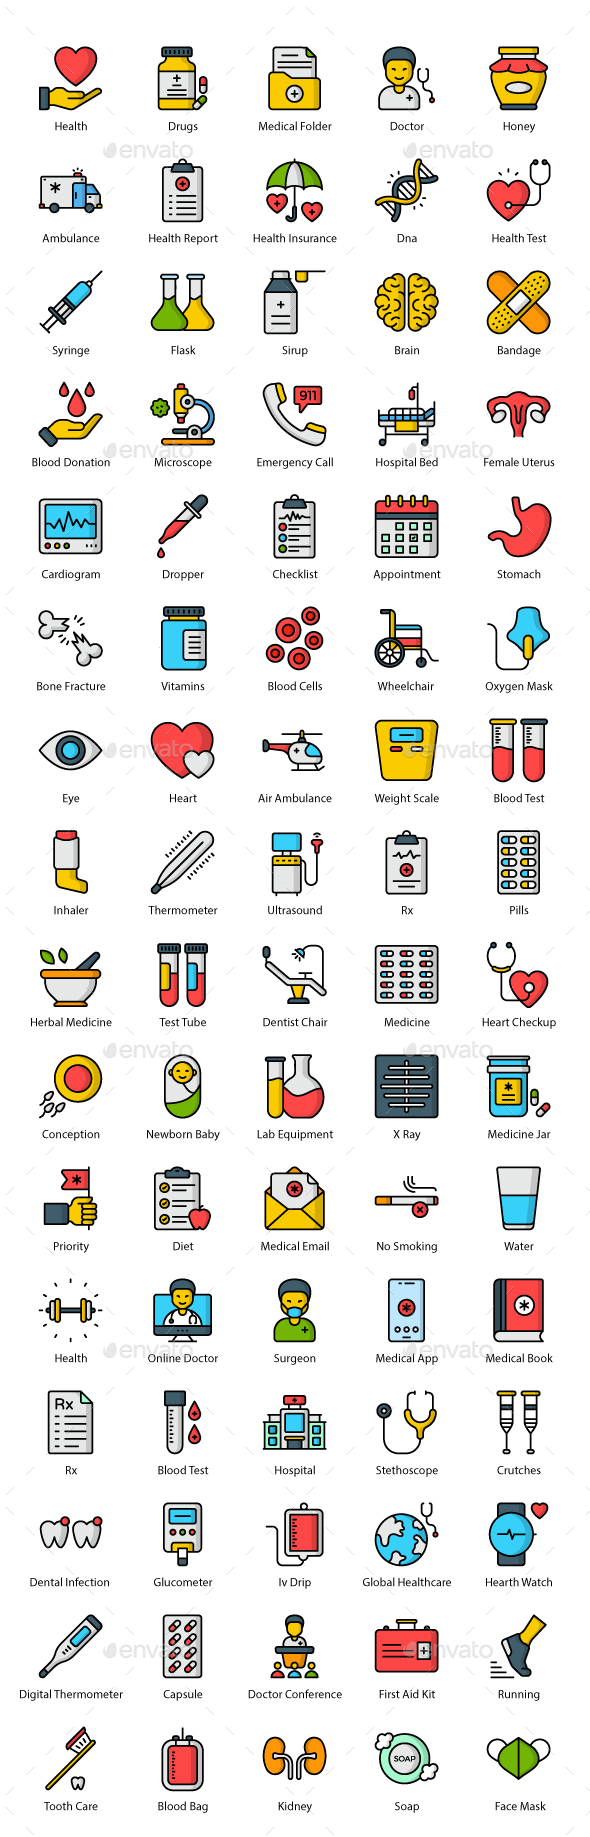 [DOWNLOAD]Medical and Health icons